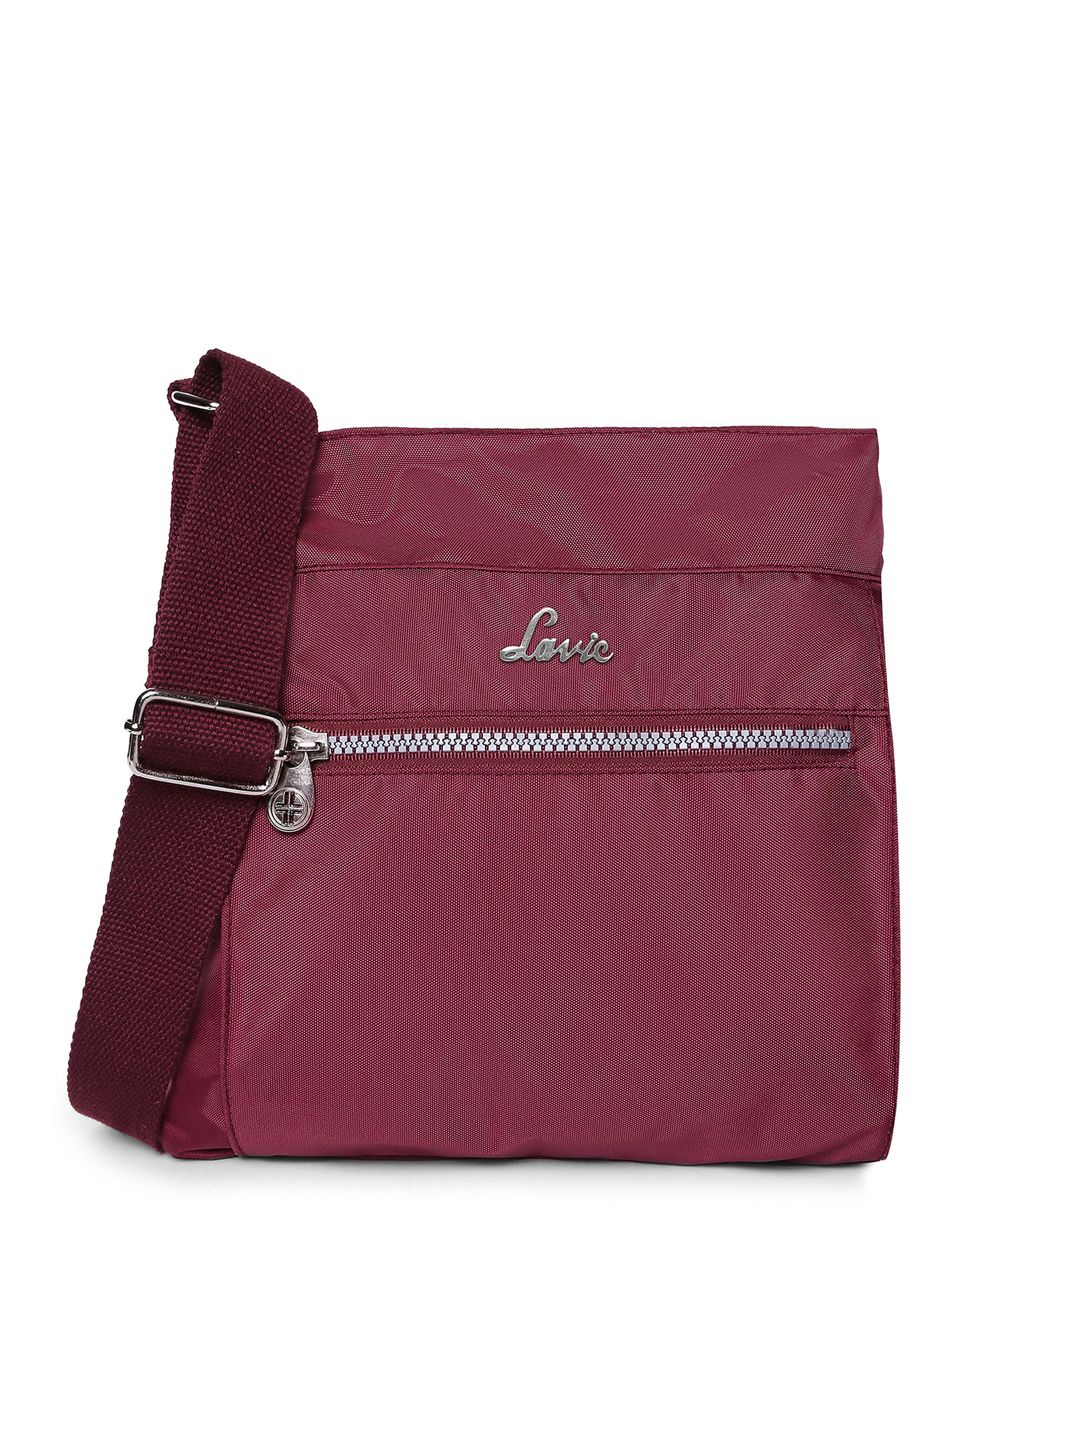 Lavie Women Burgundy Structured Sling Bag Price in India